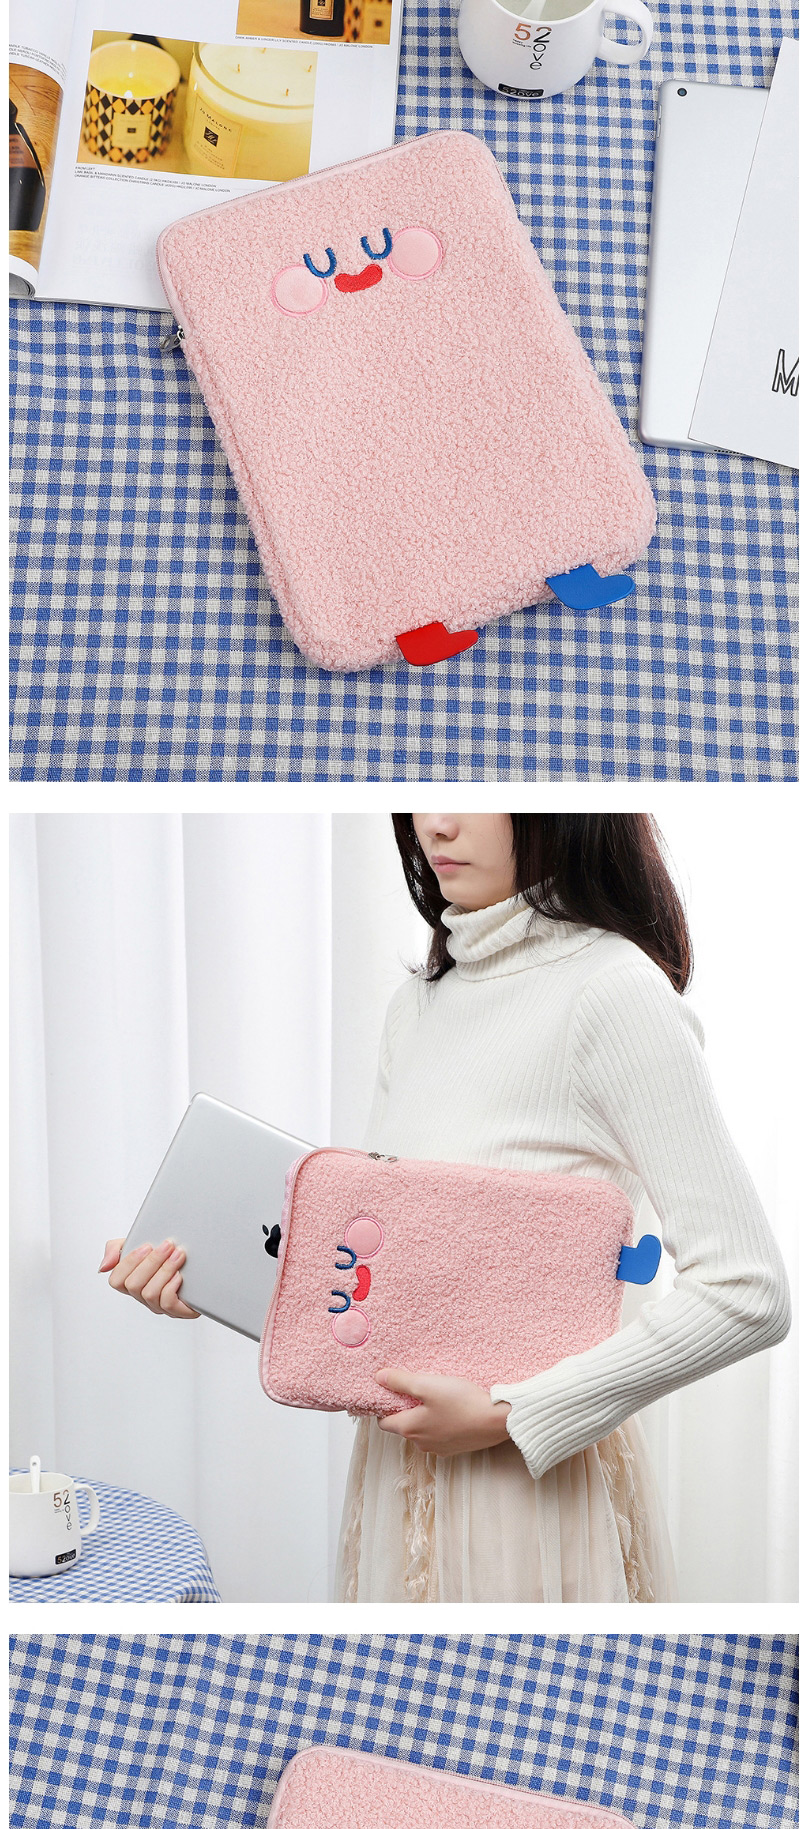 Fashion Creamy-white Plush Big Eyes Embroidered Tablet Computer Bag 11 Inch 10.5 Inch 9.7 Inch Liner,Computer supplies